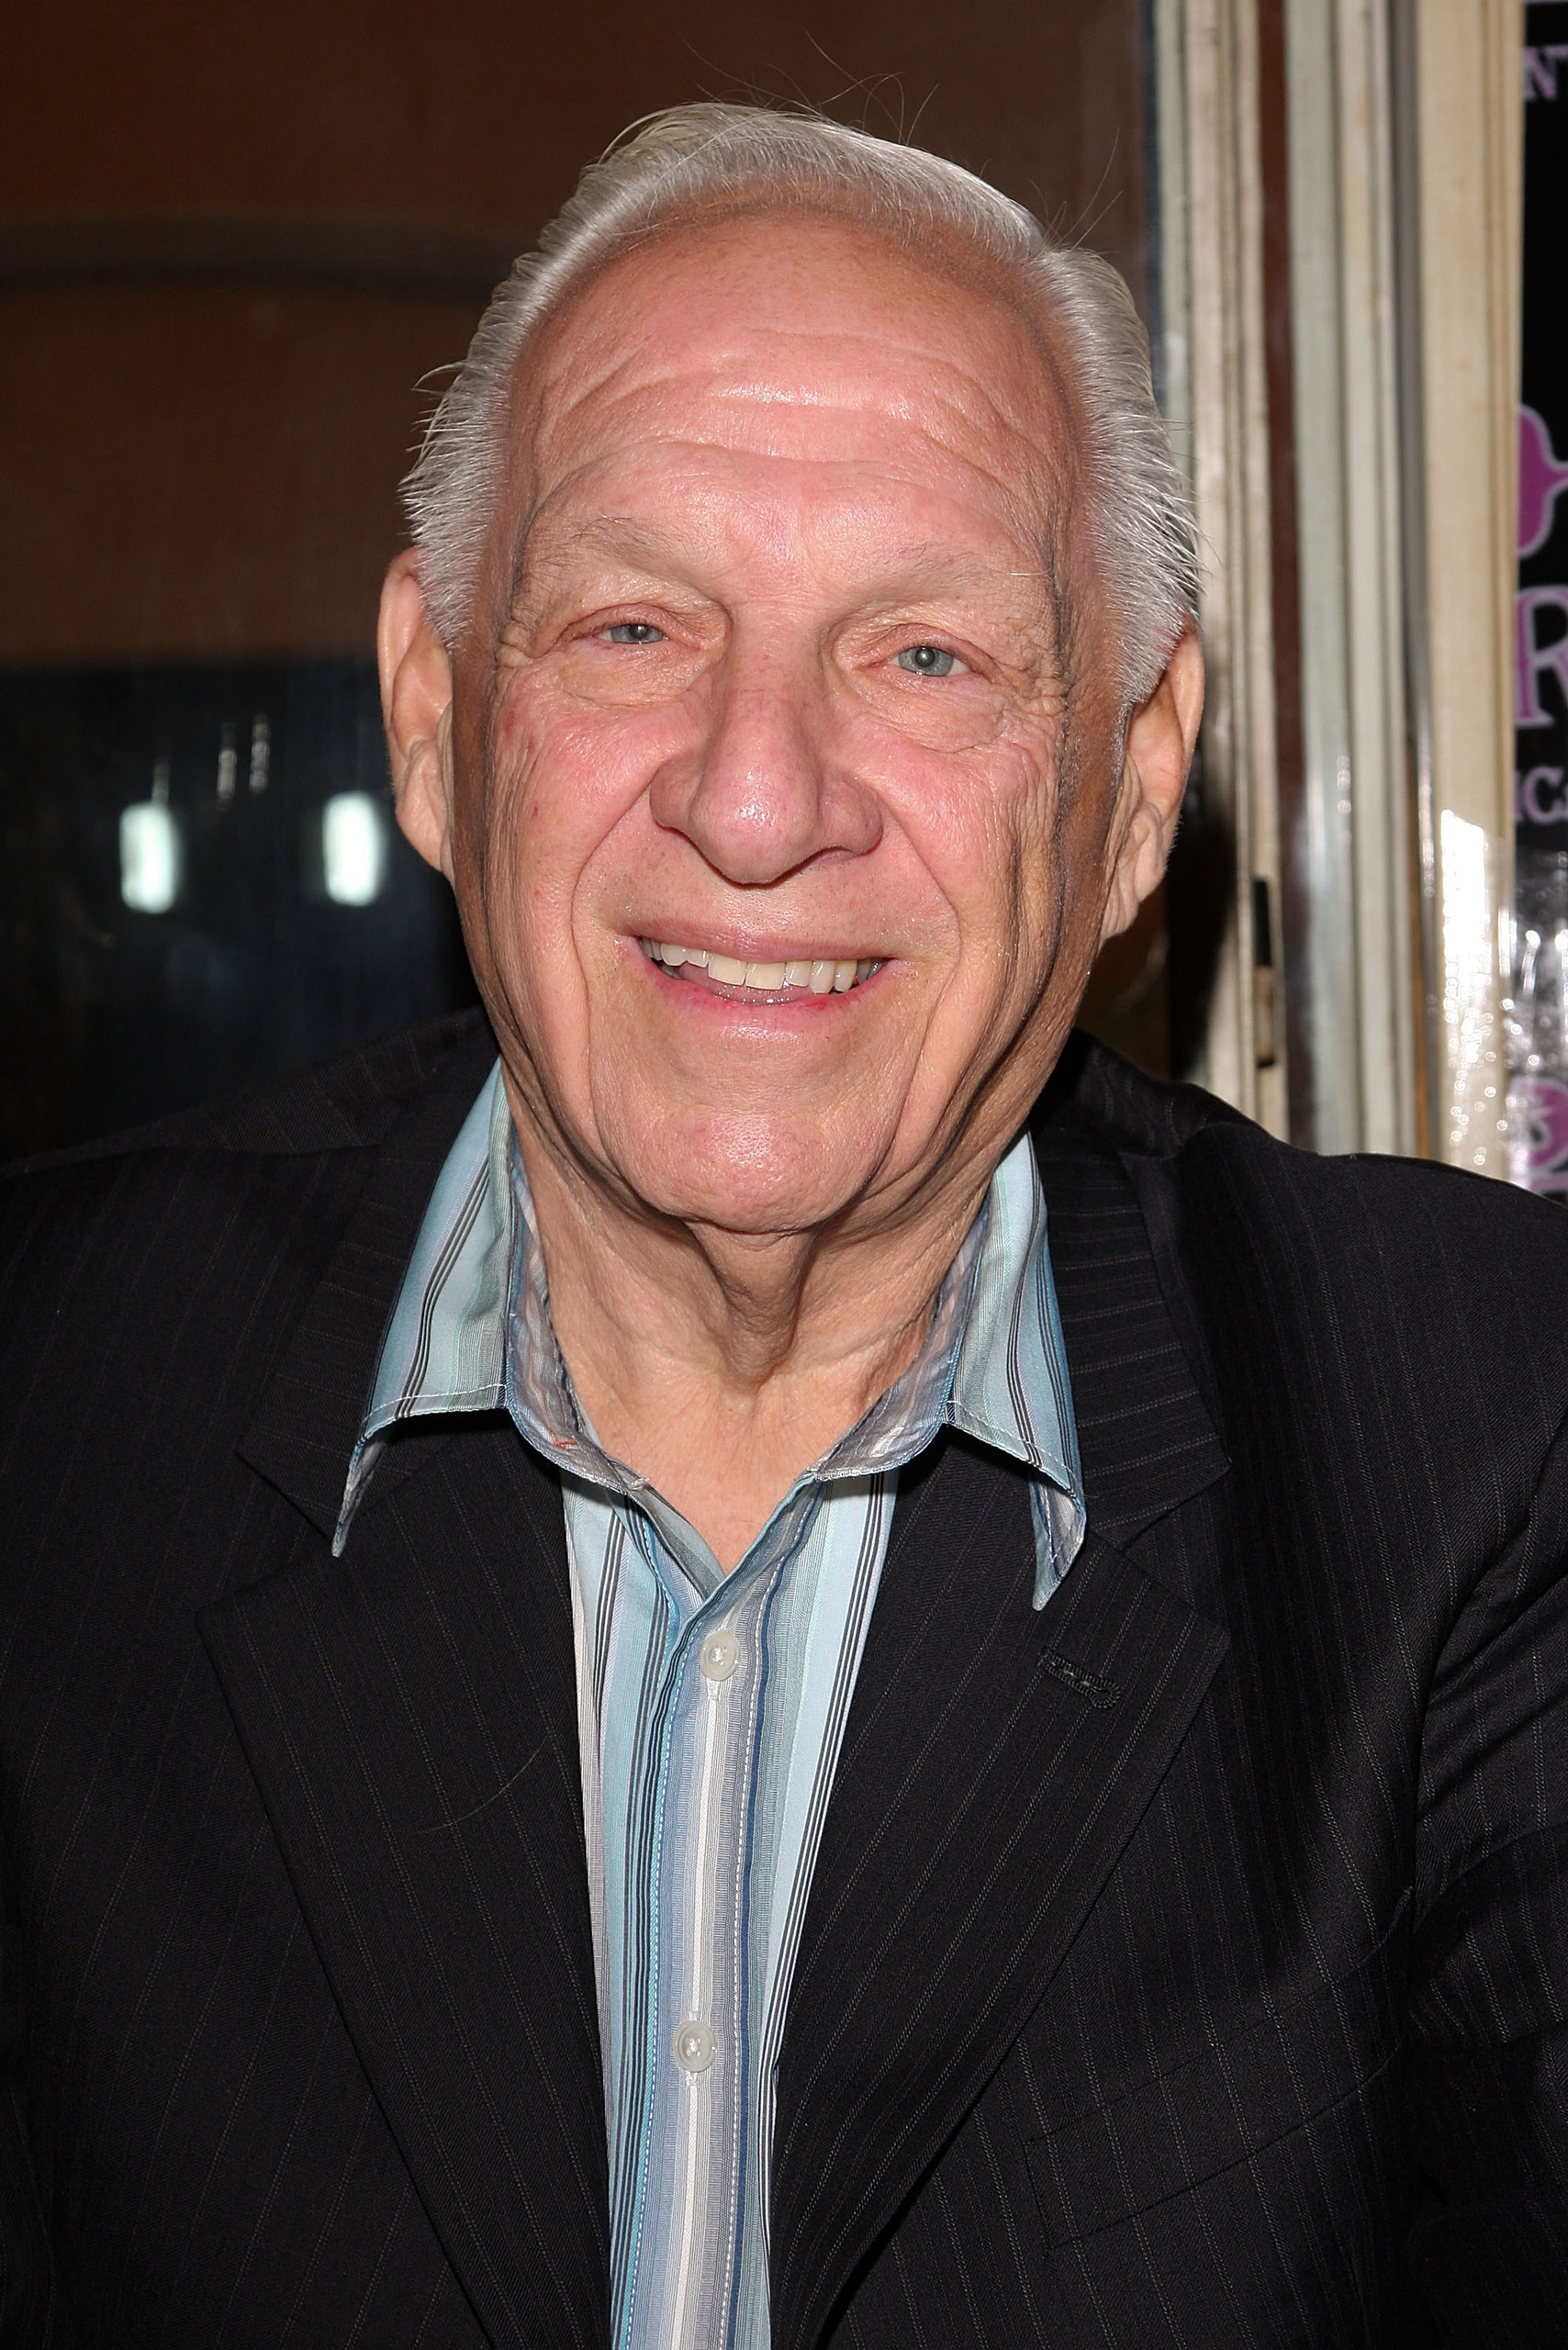 Co-founder of Ruthless Records and former N.W.A. manager Jerry Heller attends his book launch for Ruthless: A Memoir on June 13, 2008 at Cicero Bazzar Restaurant in Mexico City, Mexico. (Photo by Victor Chavez/WireImage)